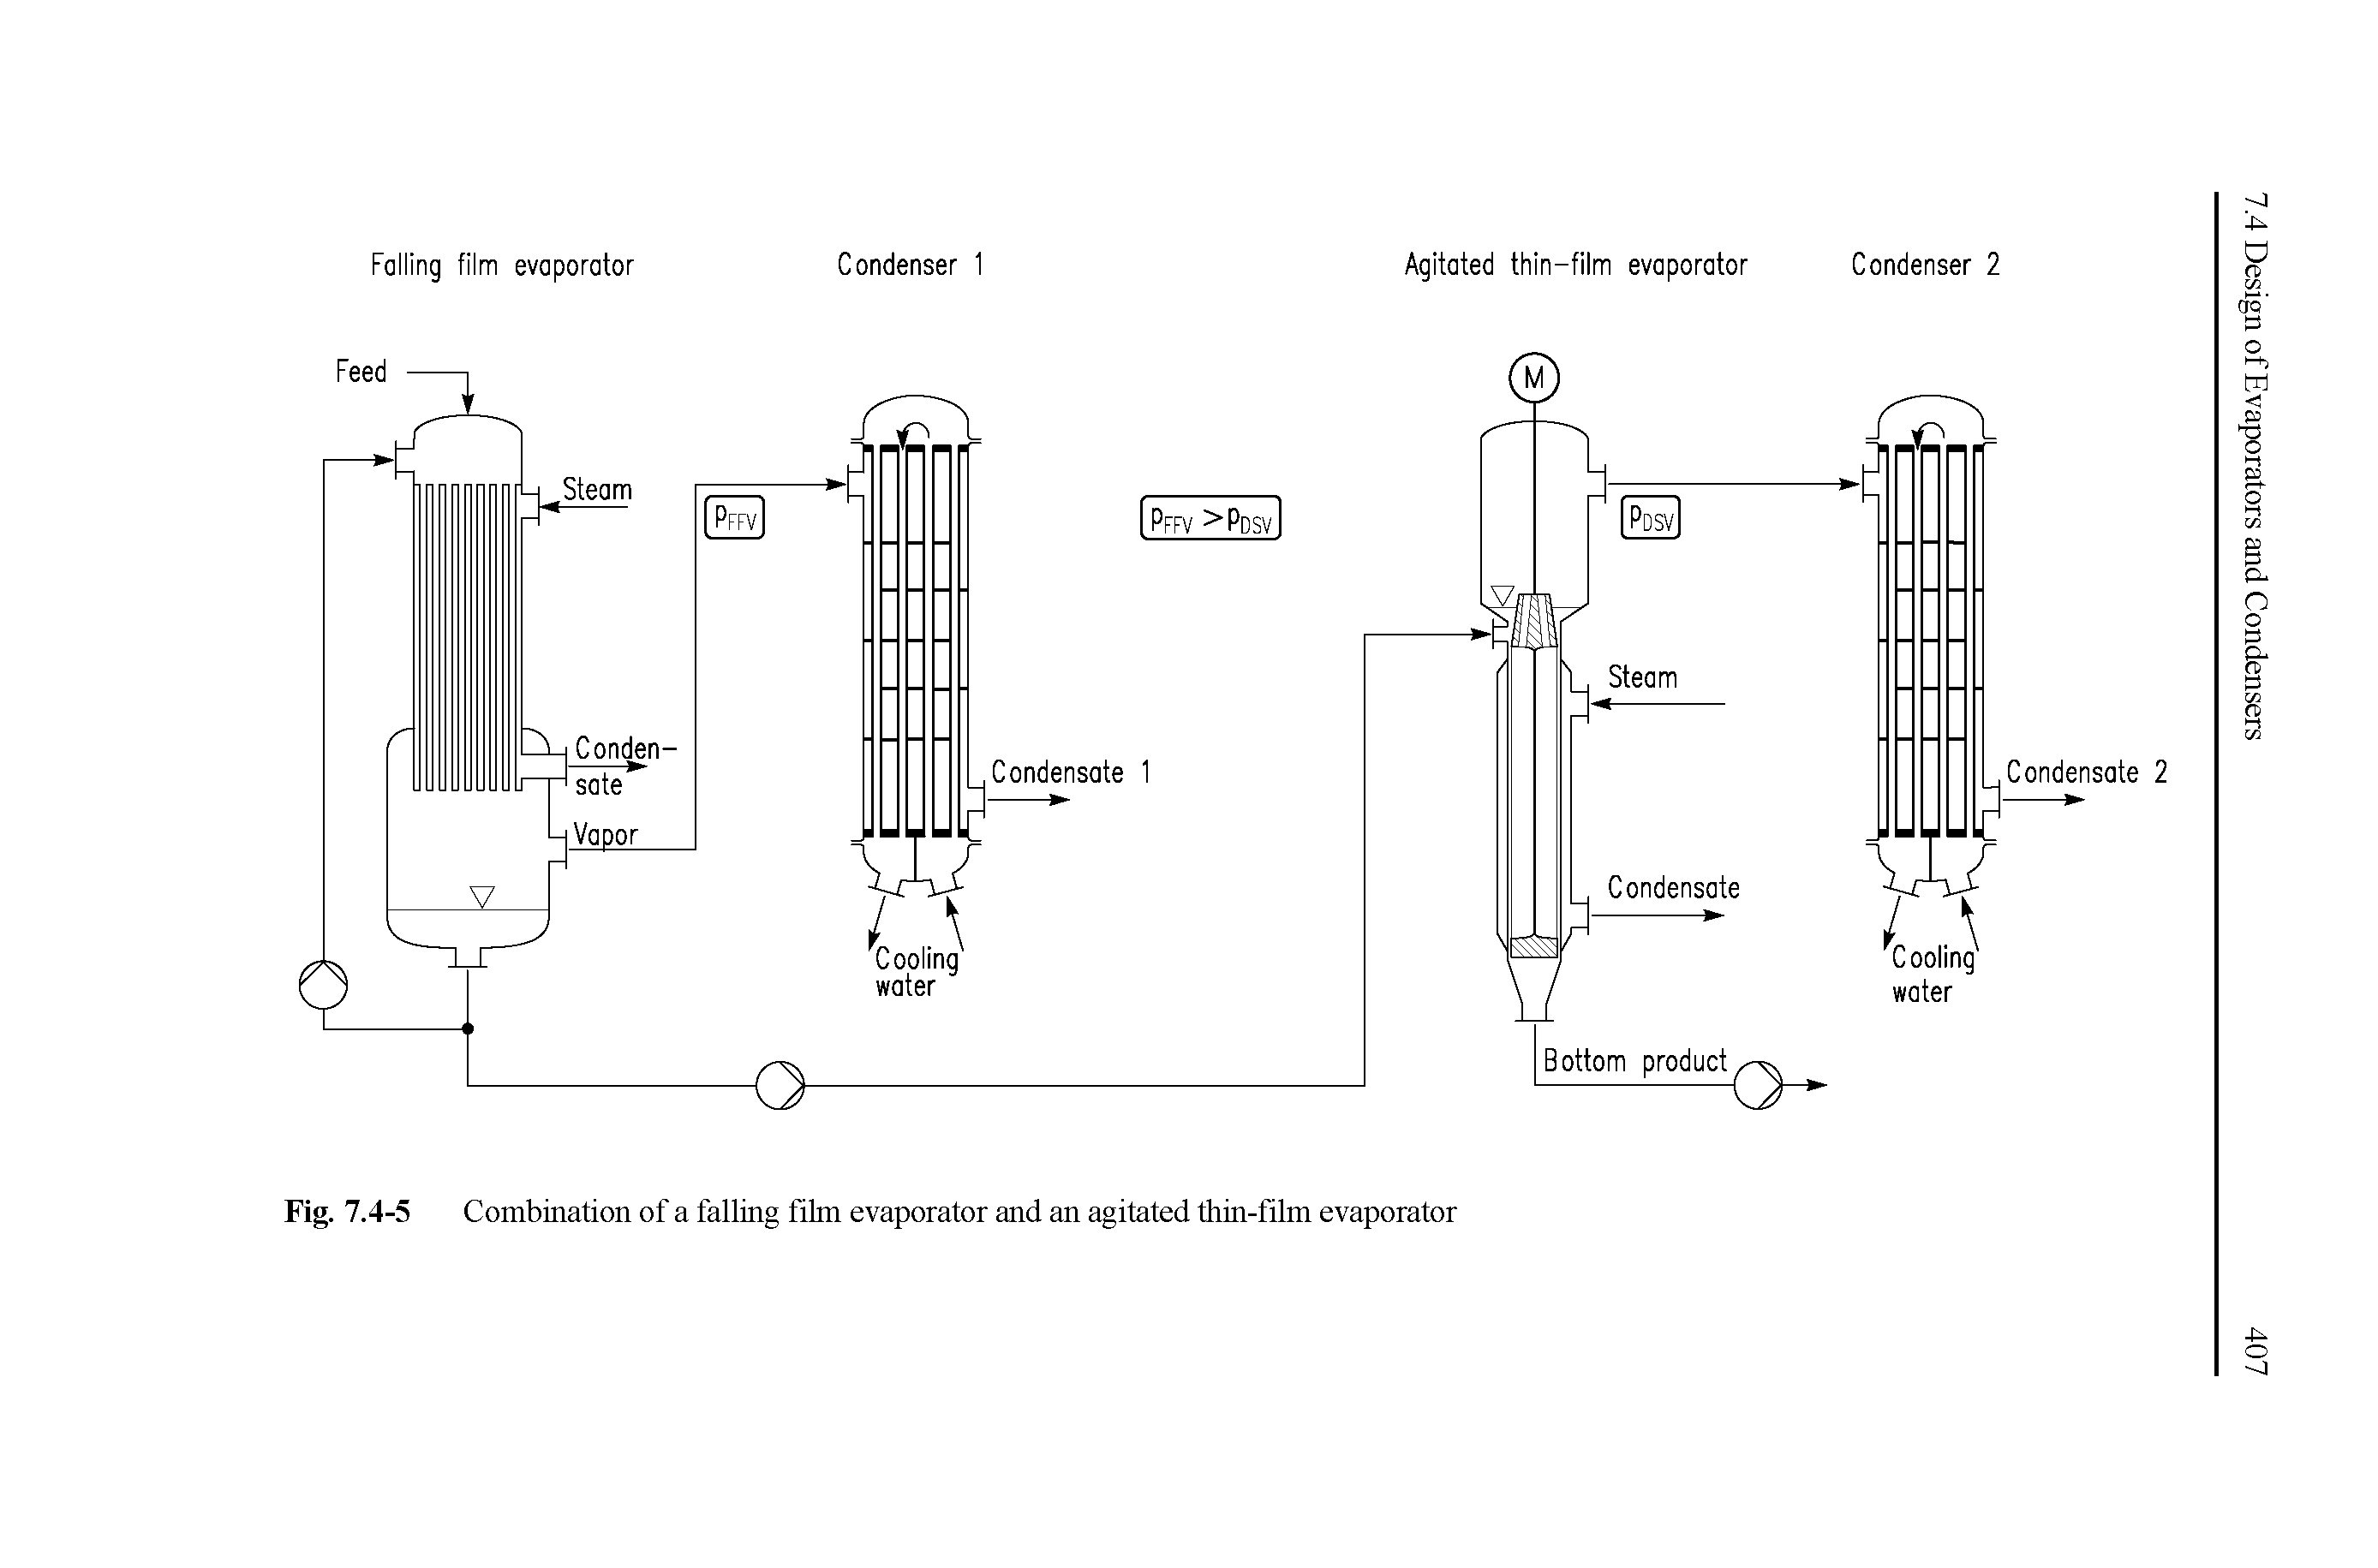 Fig. 7.4-5 Combination of a falling film evaporator and an agitated thin-film evaporator...